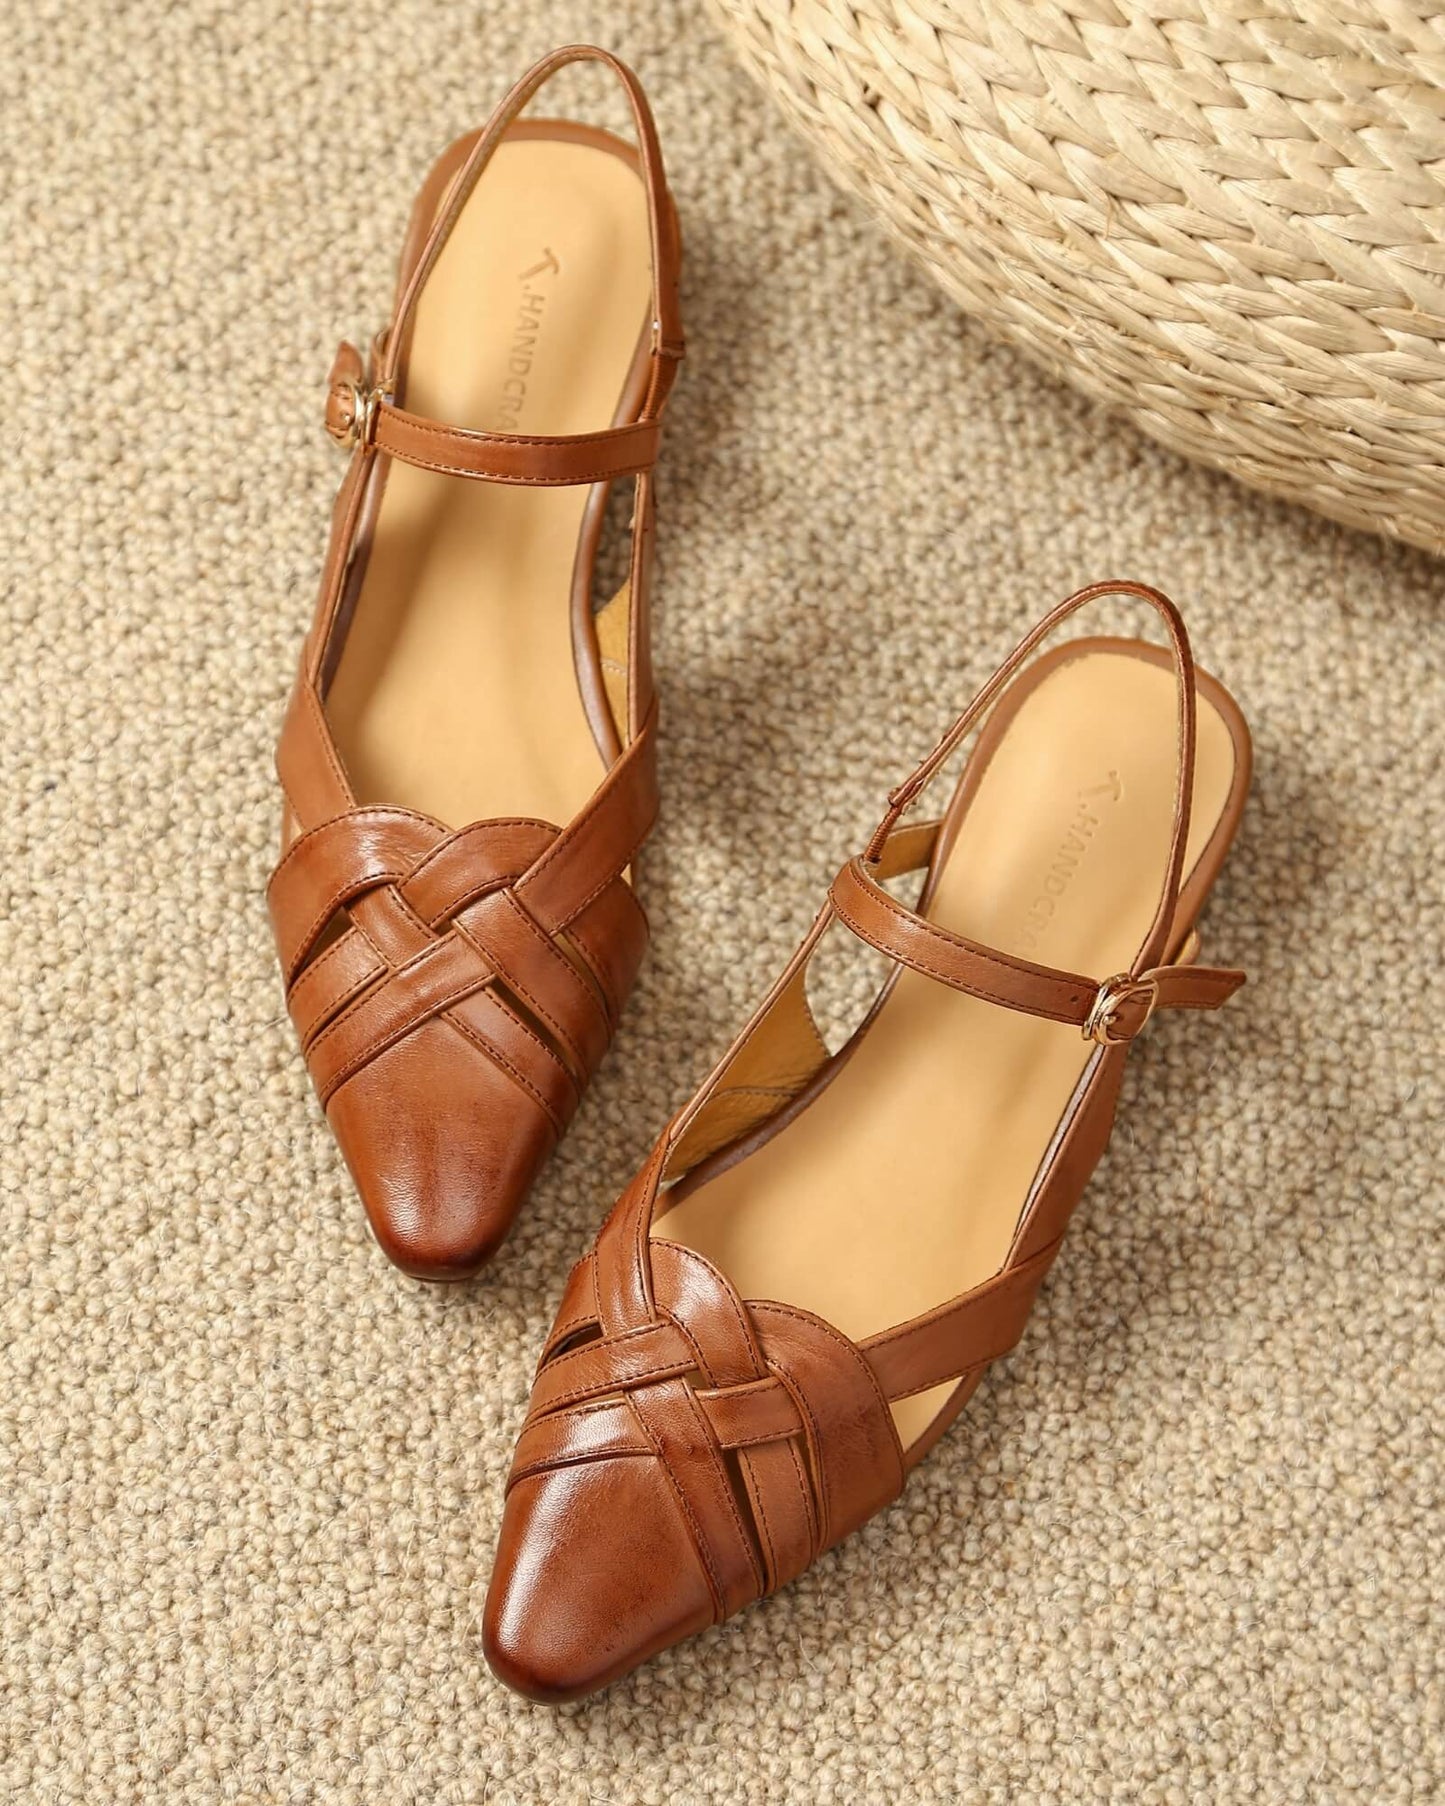 Moda - Woven Leather Sandals